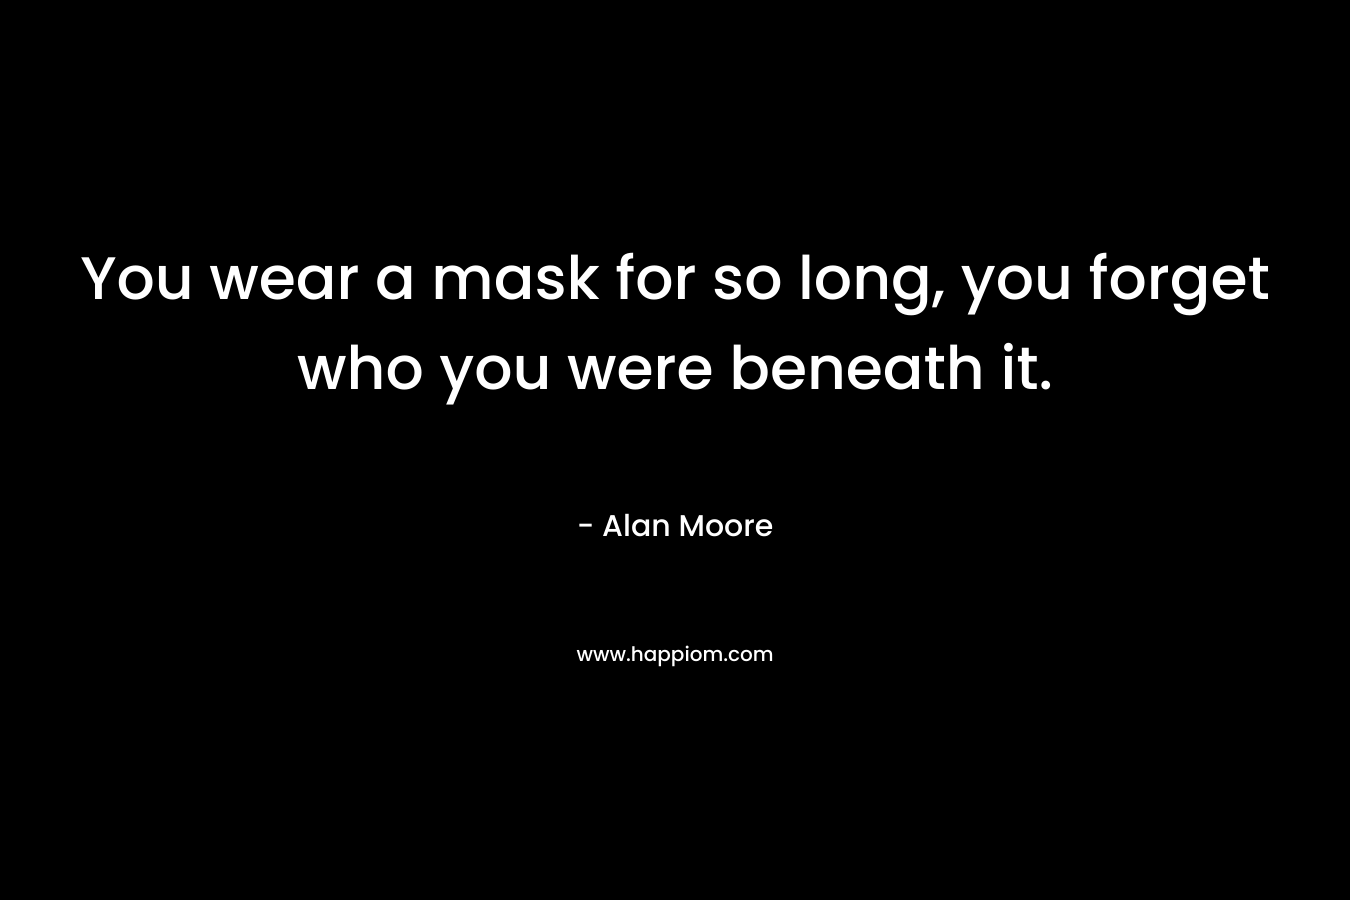 You wear a mask for so long, you forget who you were beneath it. – Alan Moore